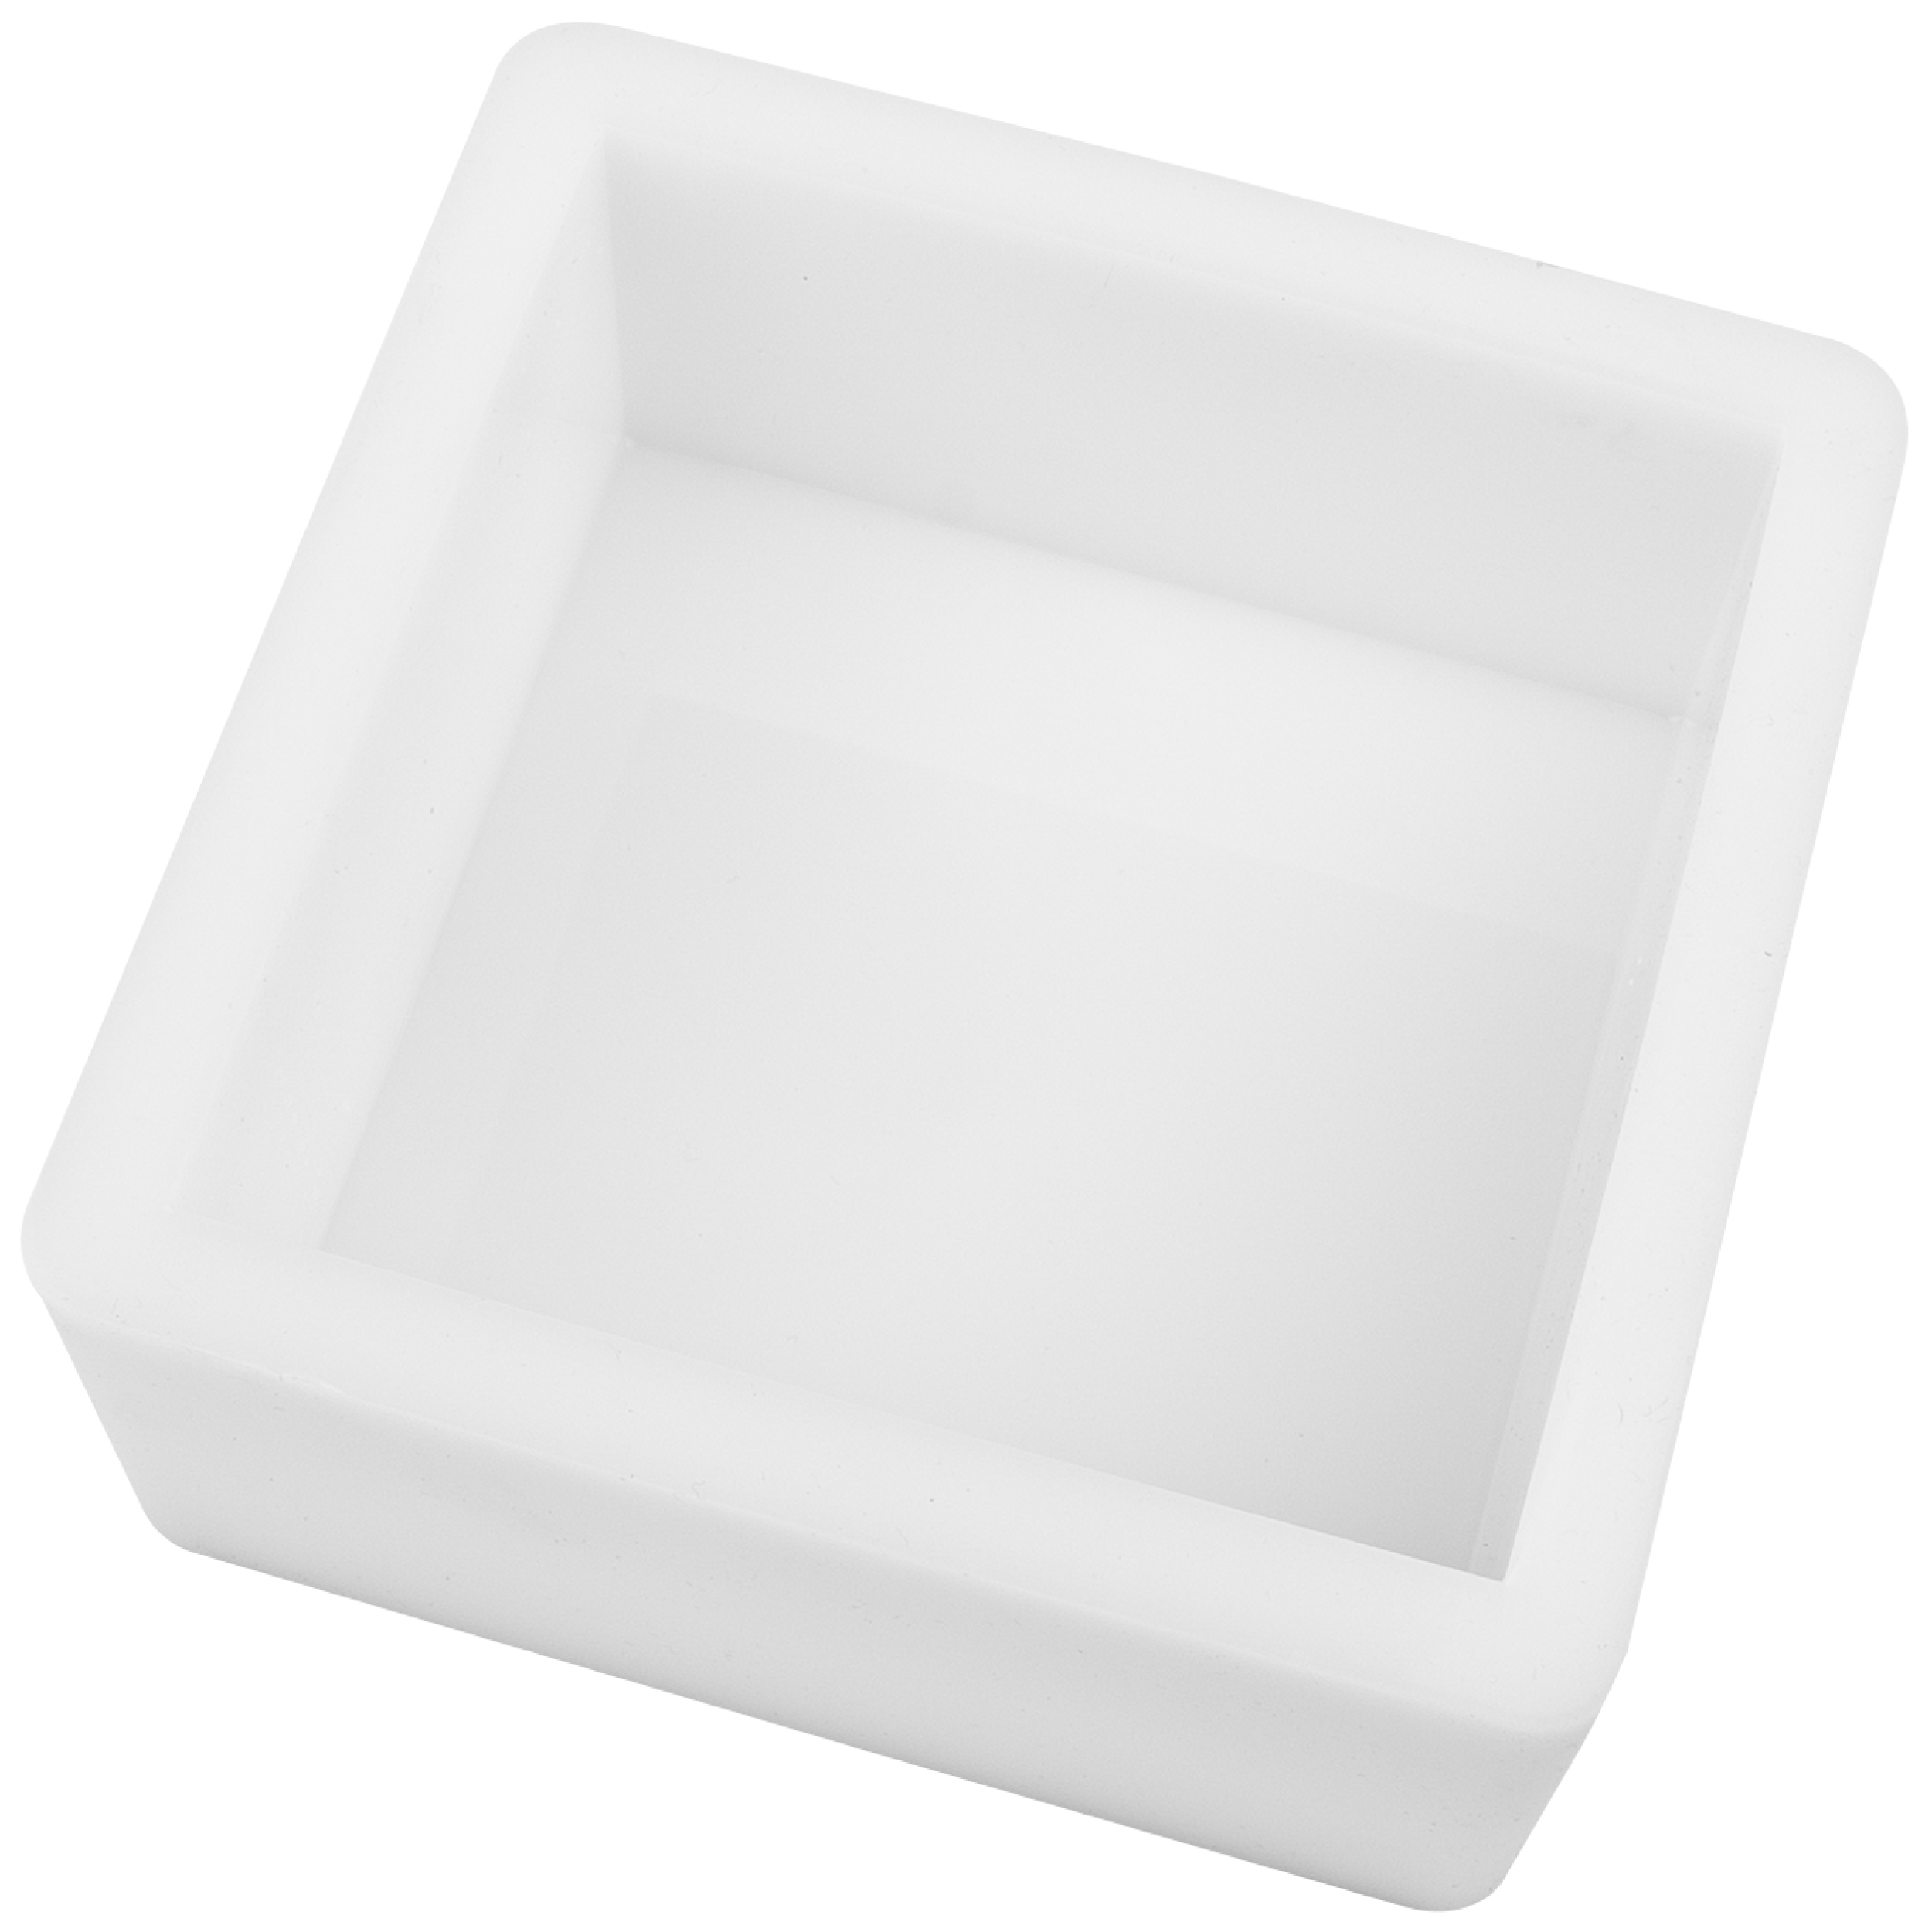 6 x 6 x 3 Deep Square Silicone Mold (Eye Candy Molds) - Superclear Epoxy  Resin Systems